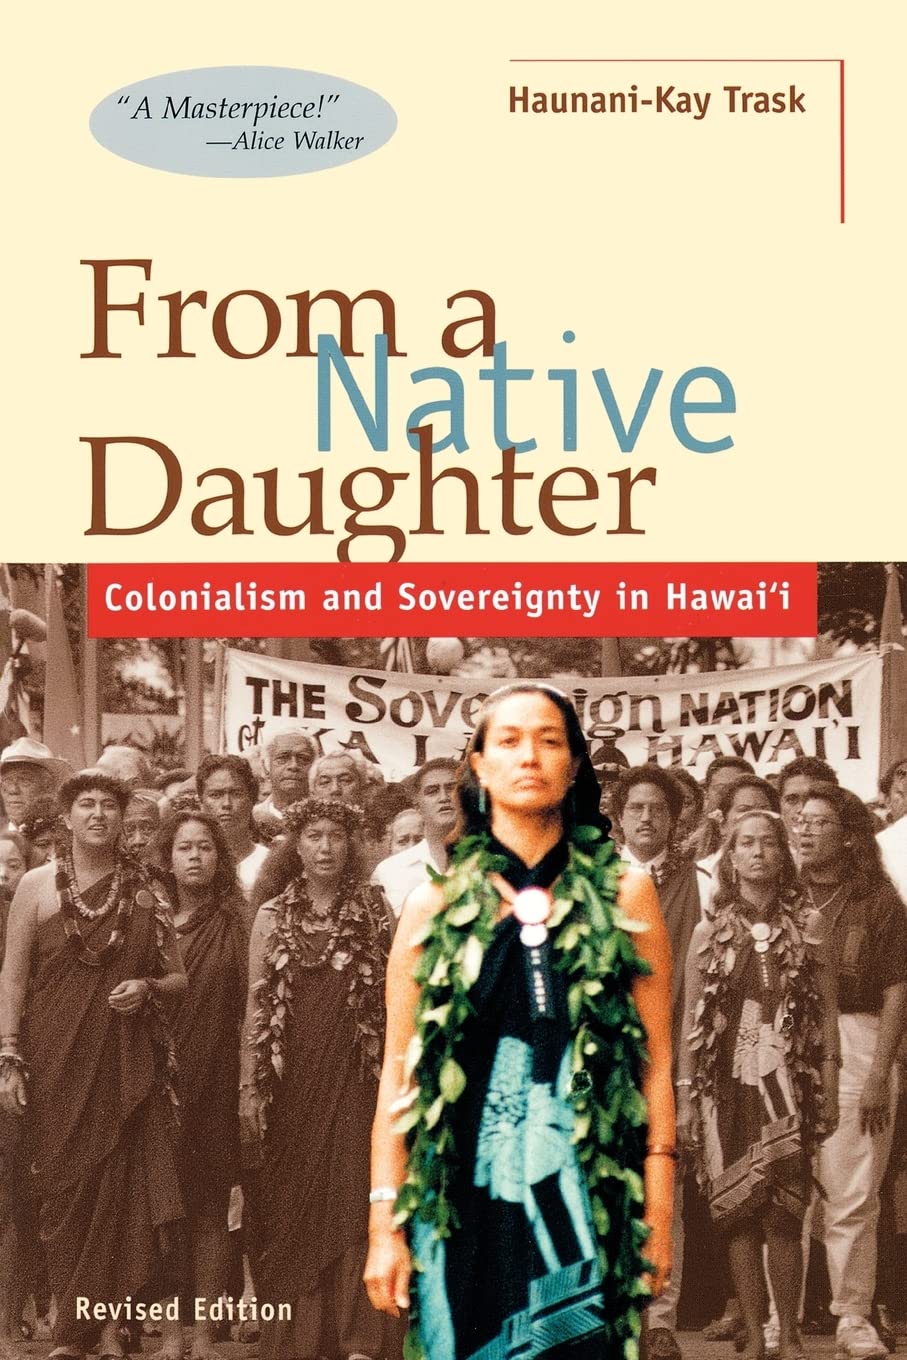 From a Native Daughter: Colonialism and Sovereignty in Hawaii (Revised Edition) (Latitude 20 Books (Paperback)) 2nd Edition